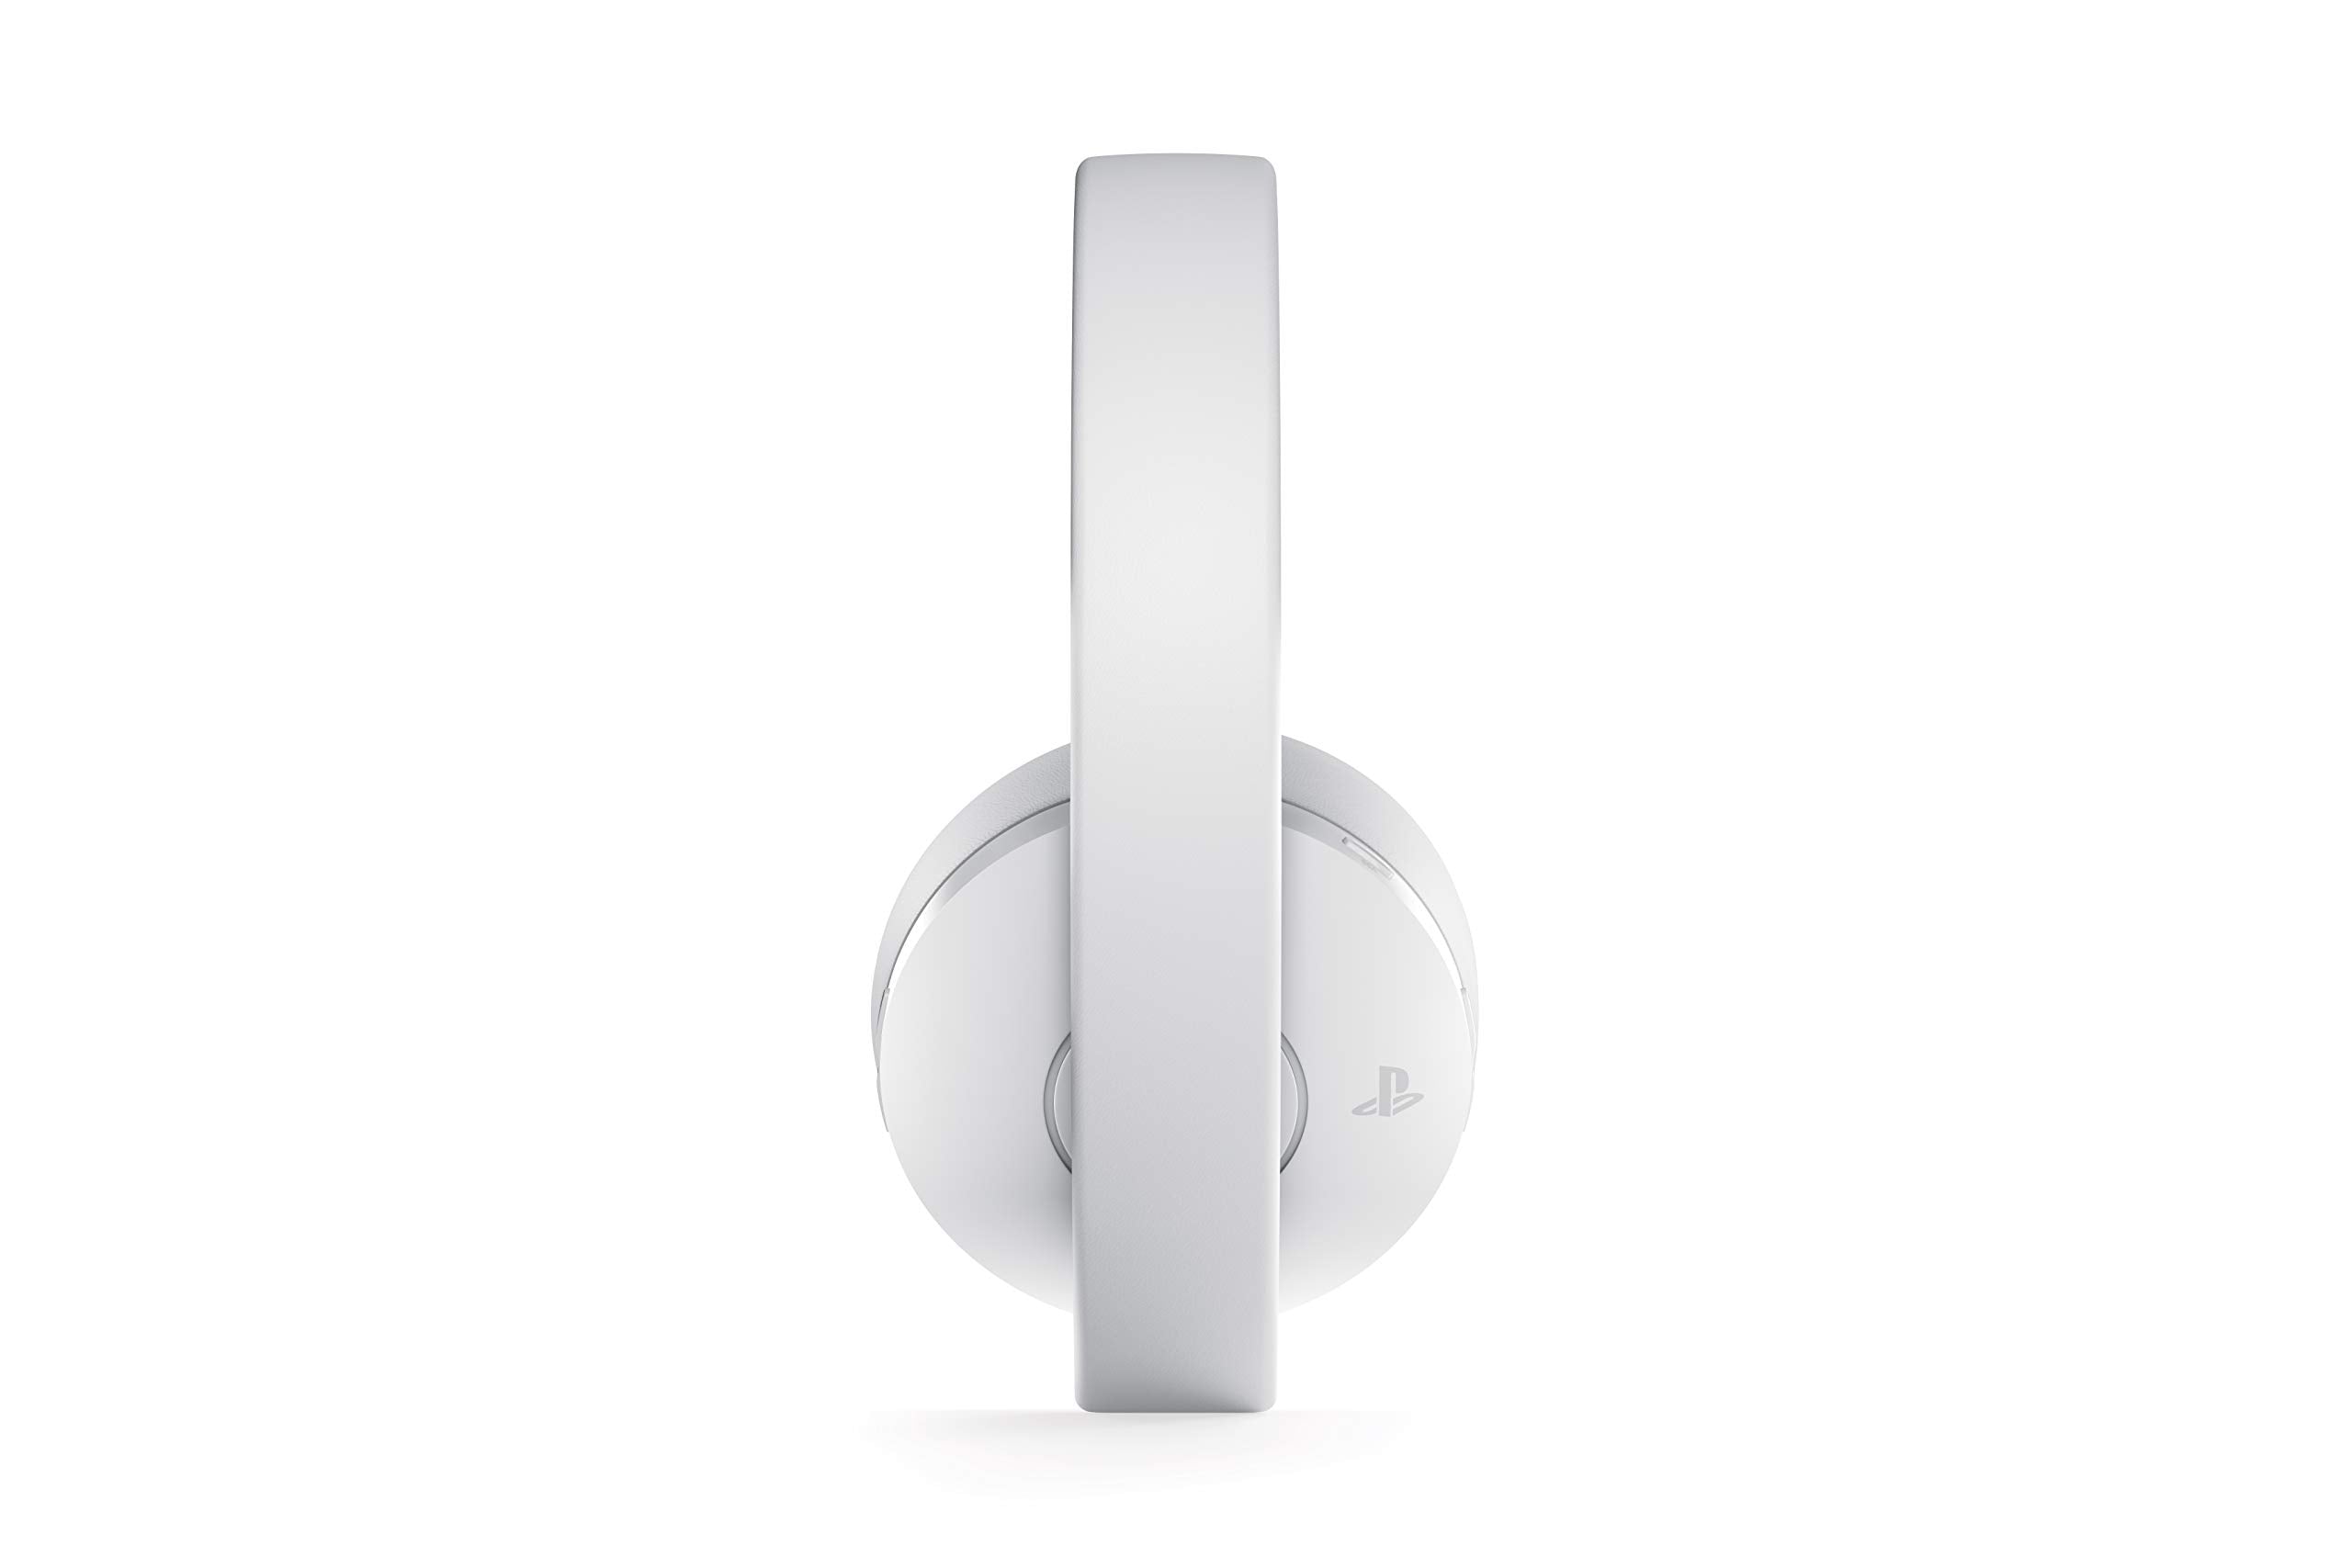 PlayStation Gold Wireless Headset White - PlayStation 4 Accessories SONY   